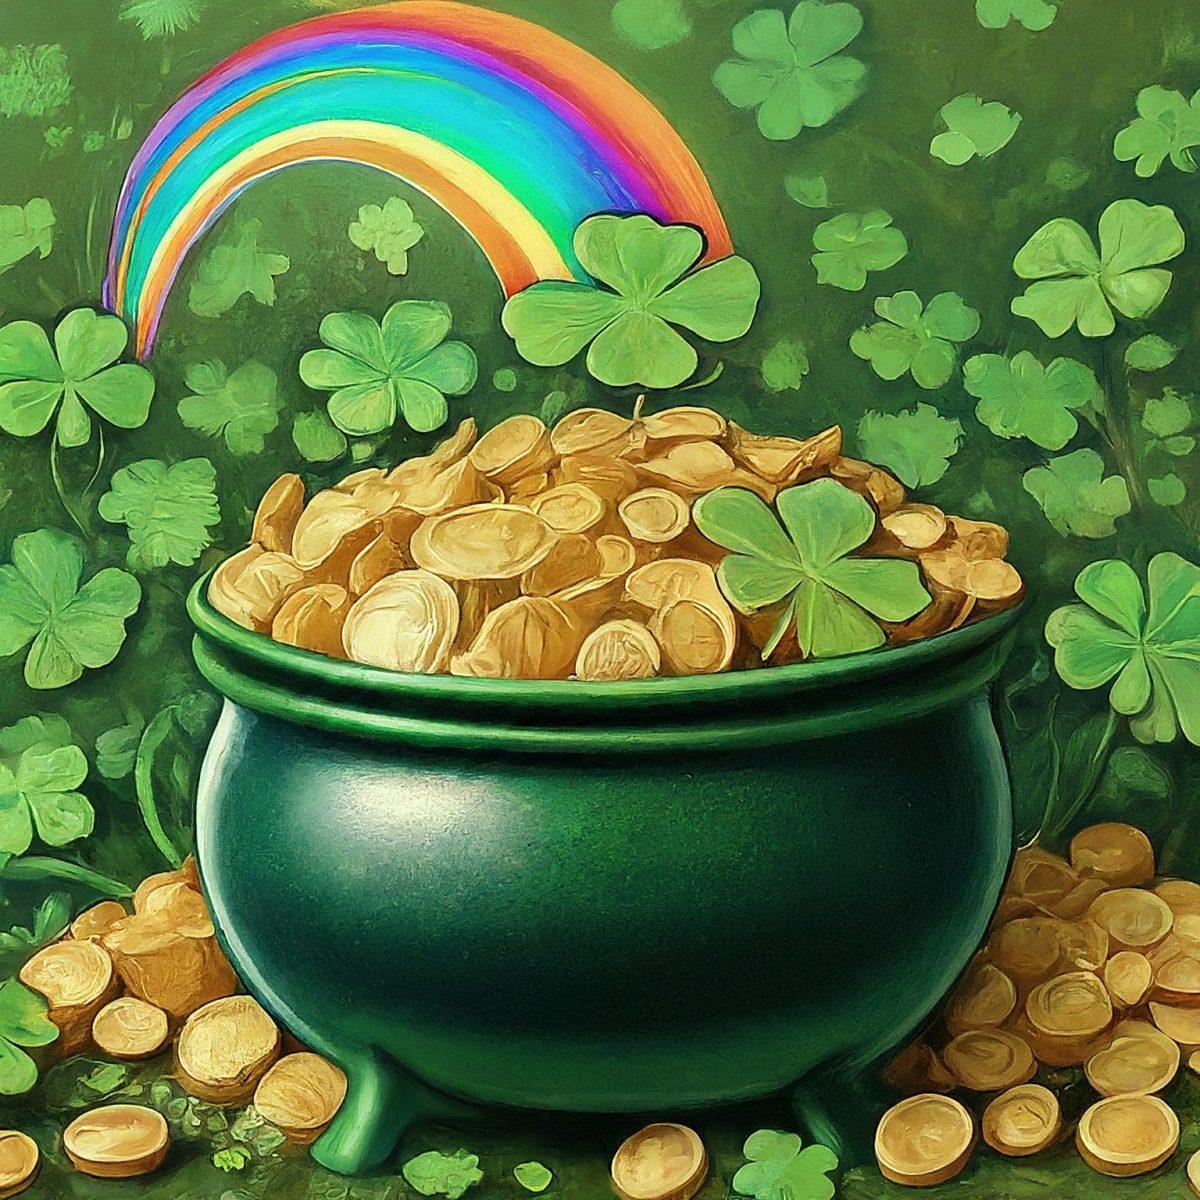 Pot of gold with rainbow and shamrocks